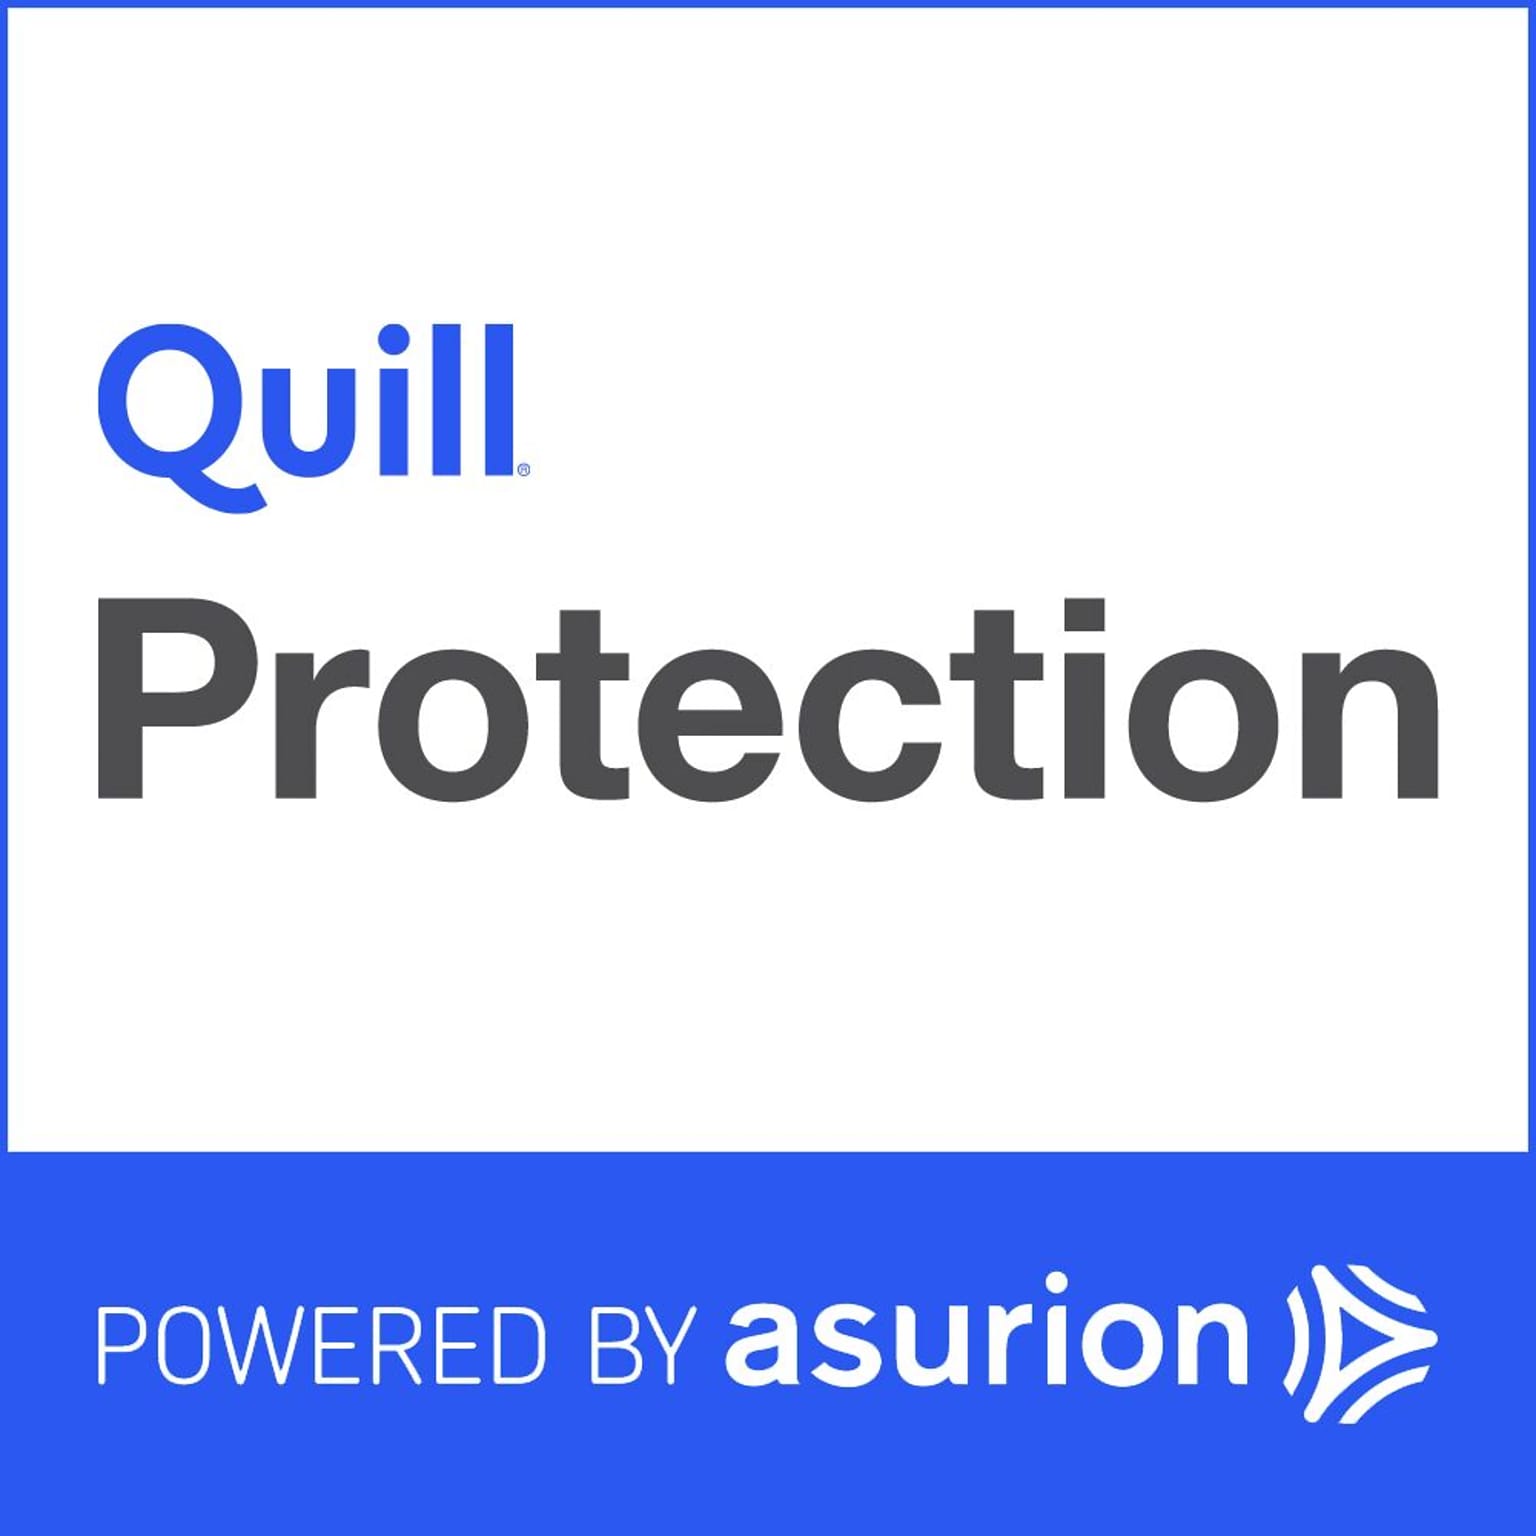 Quill.com 3 Year Protection Plan $200+